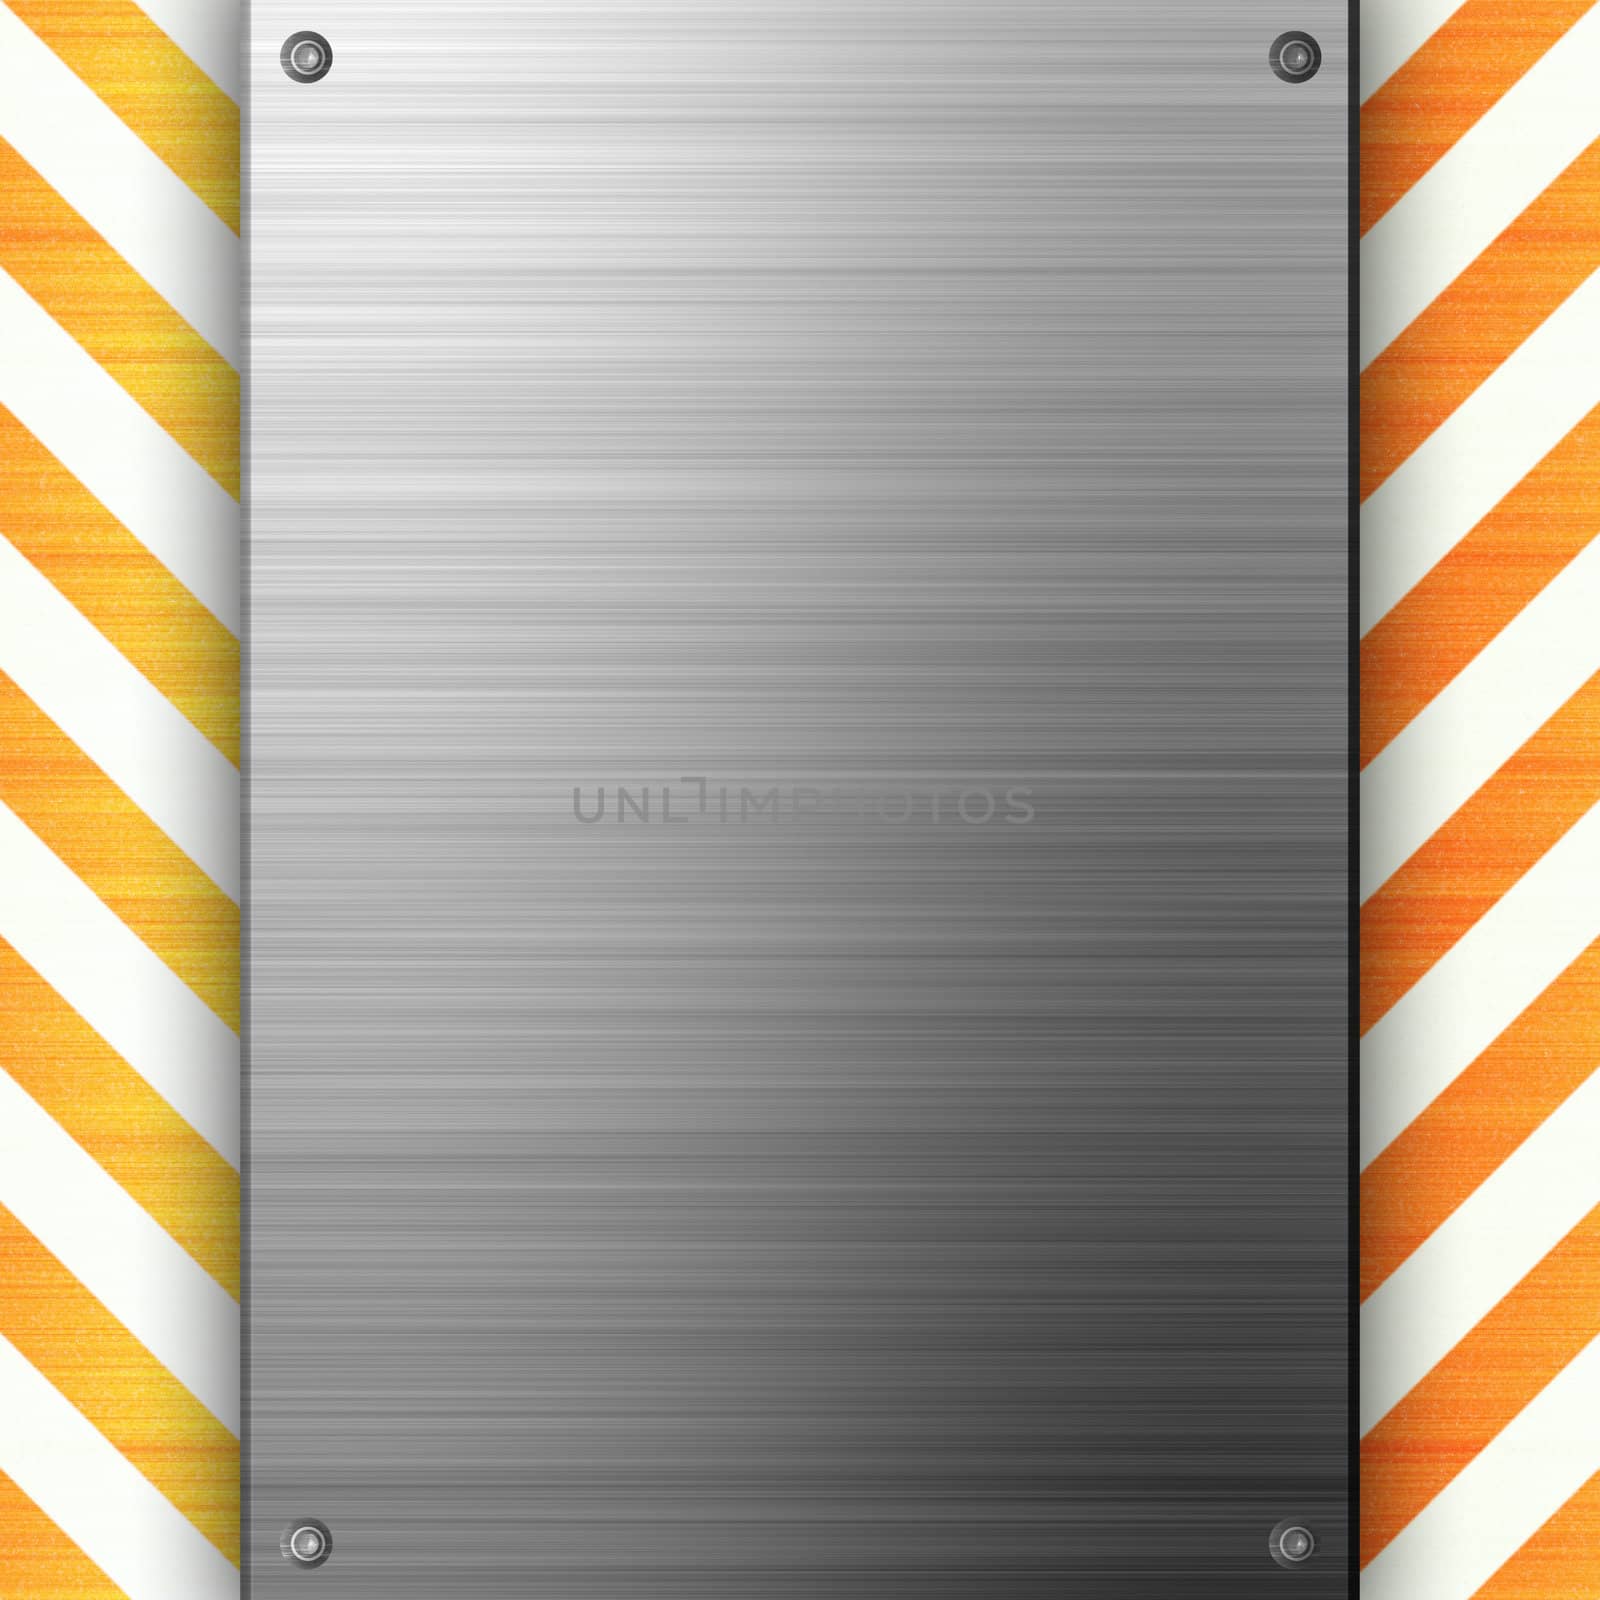 A riveted 3d brushed metal plate on a construction hazard stripes background.